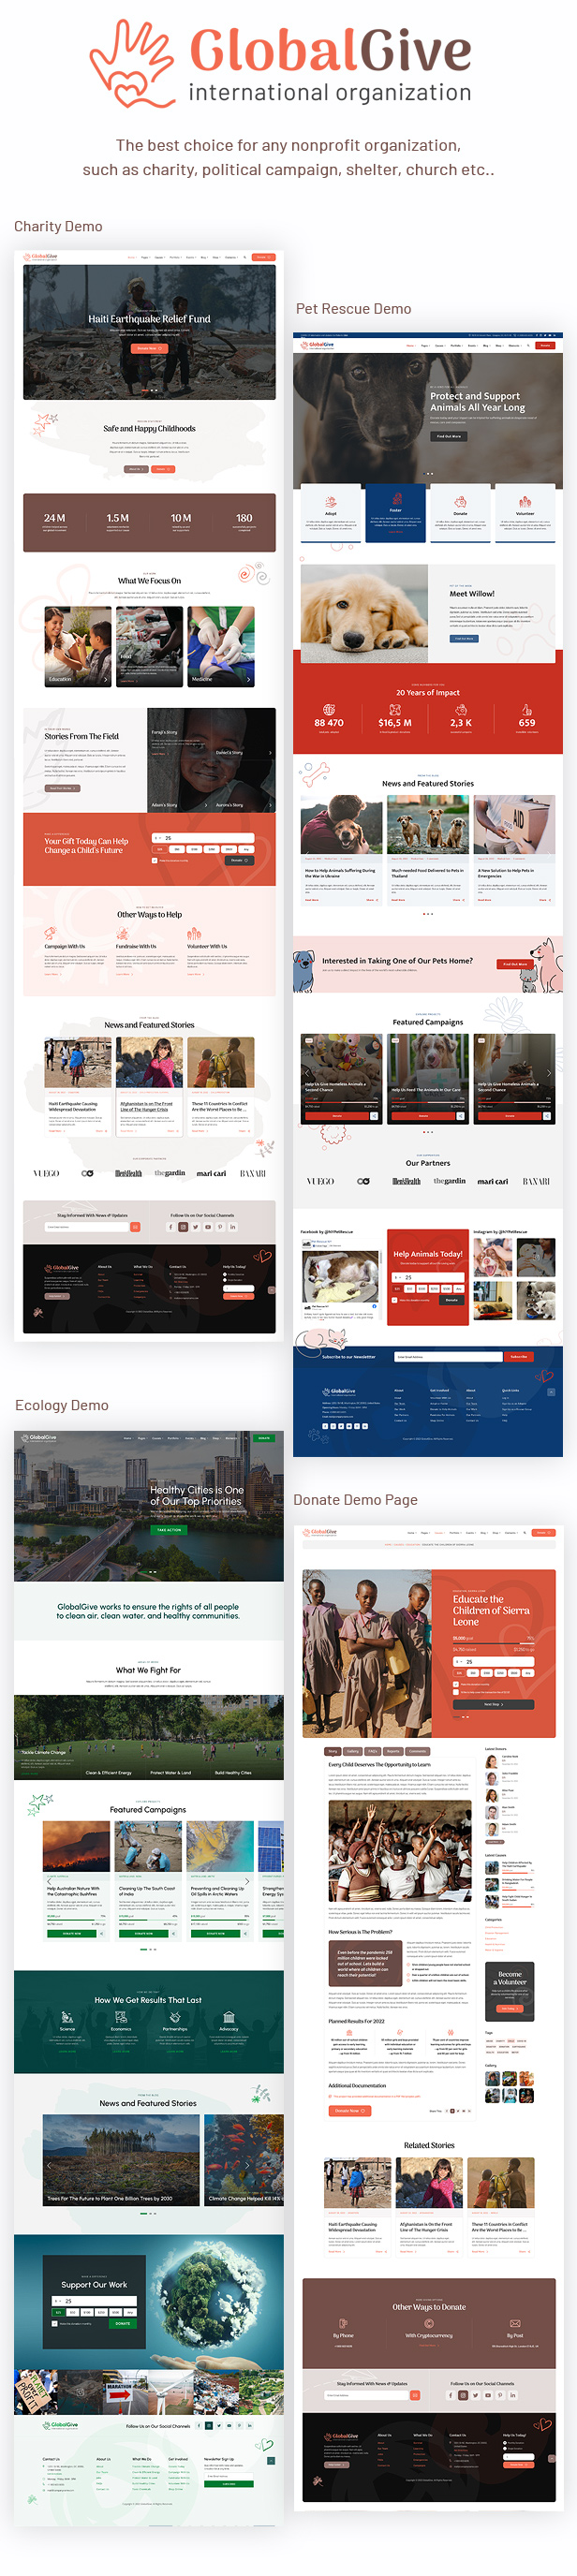 GlobalGive - Charity Foundation HTML template - 1